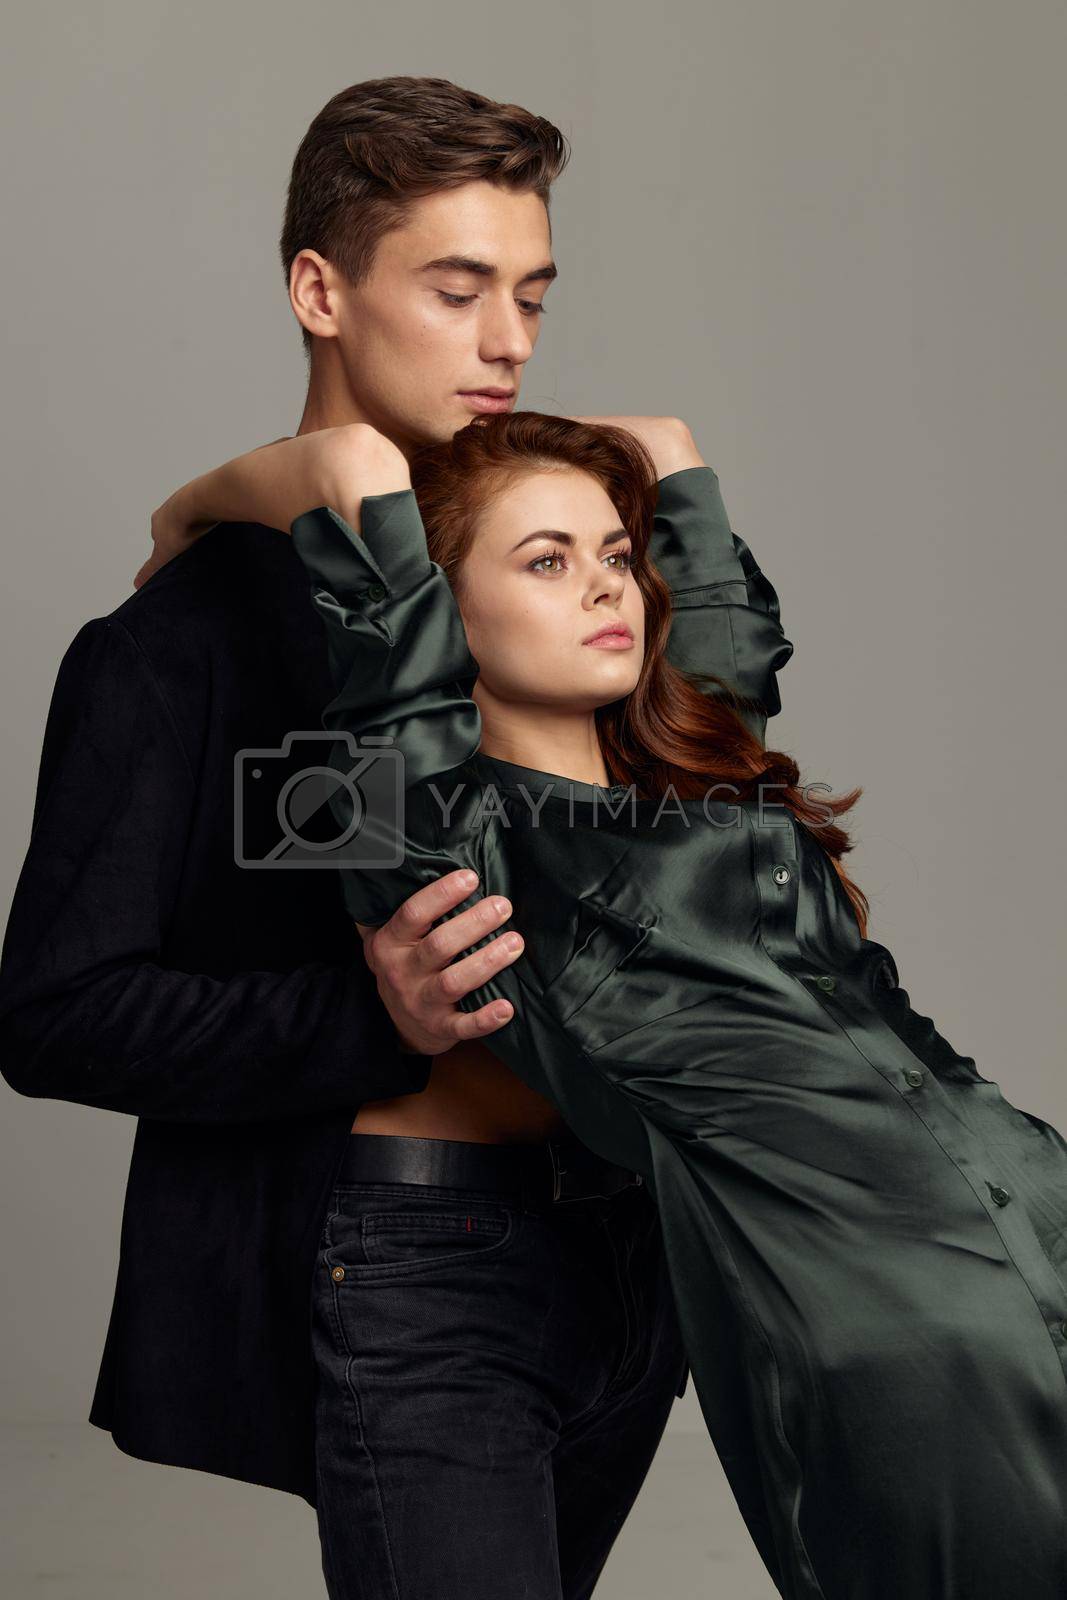 Man and woman model appearance romance studio relationship. High quality photo